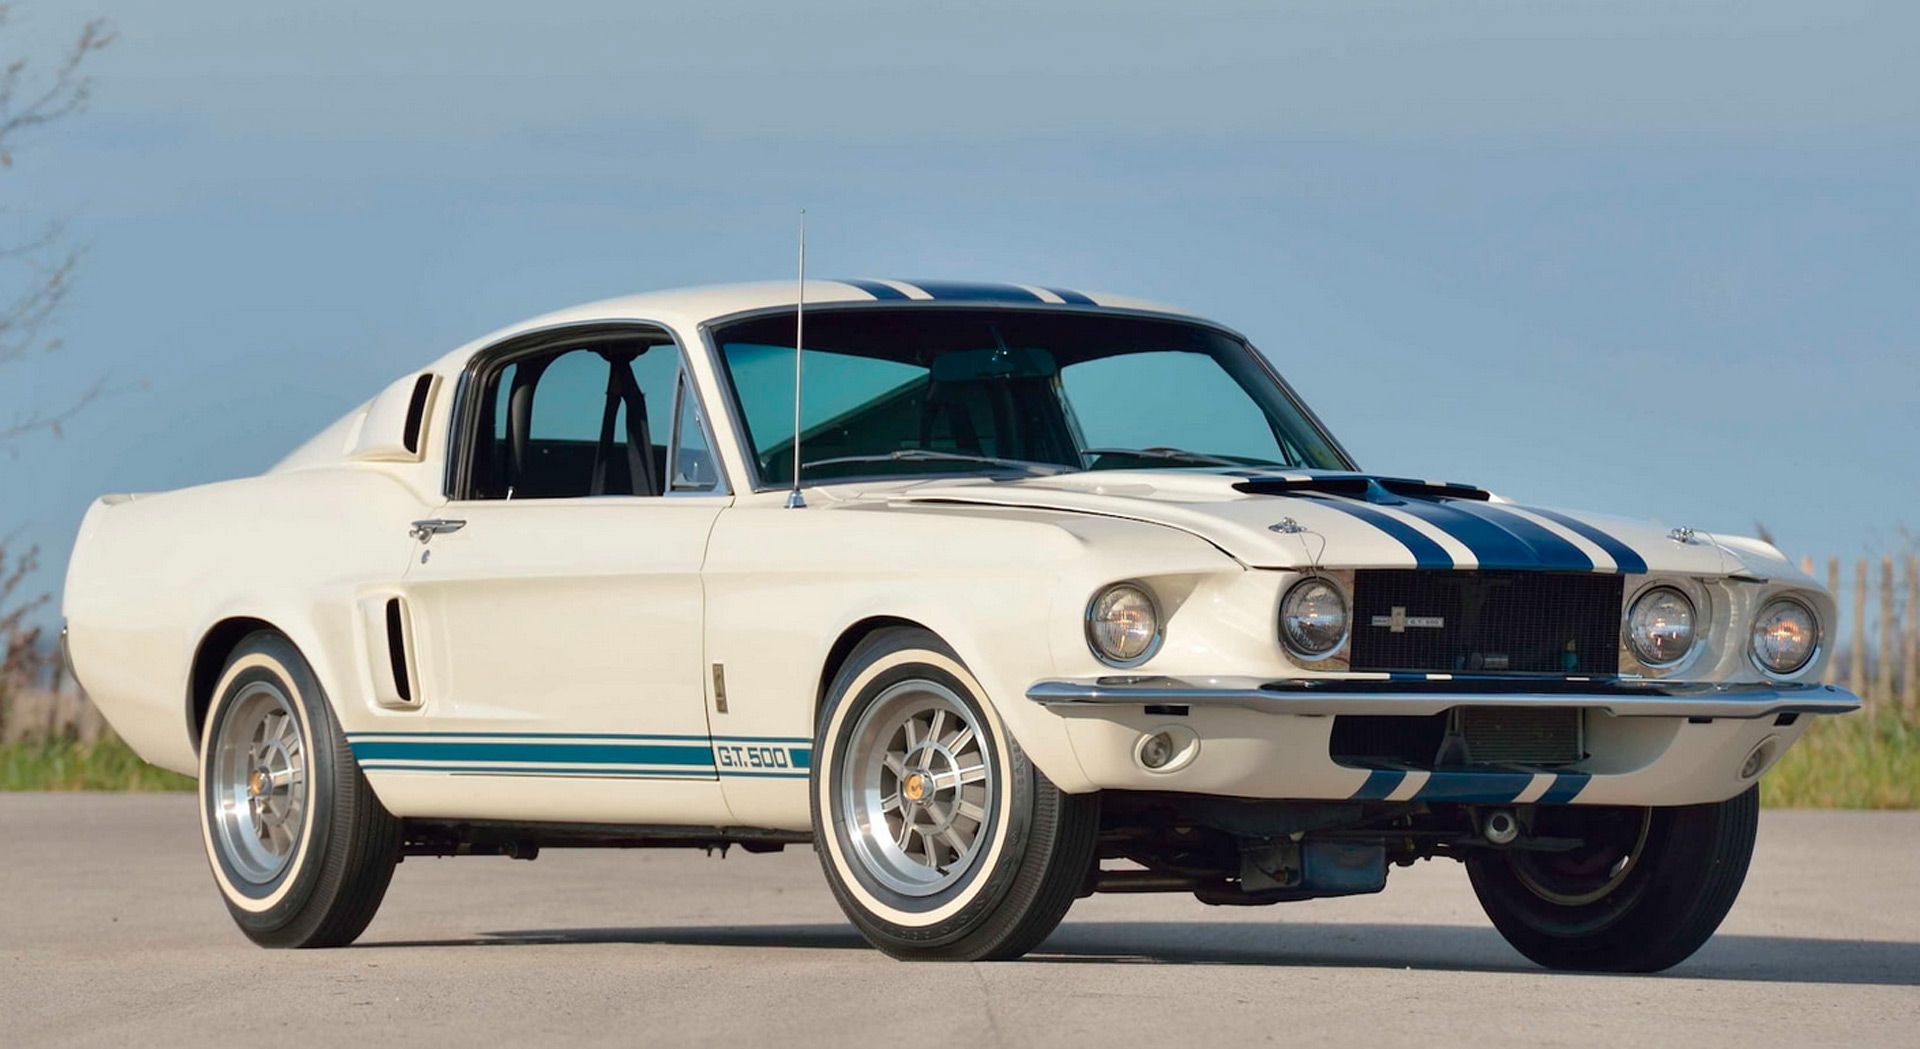 1967 Ford Mustang Shelby GT500: A muscle car like no other in the world.